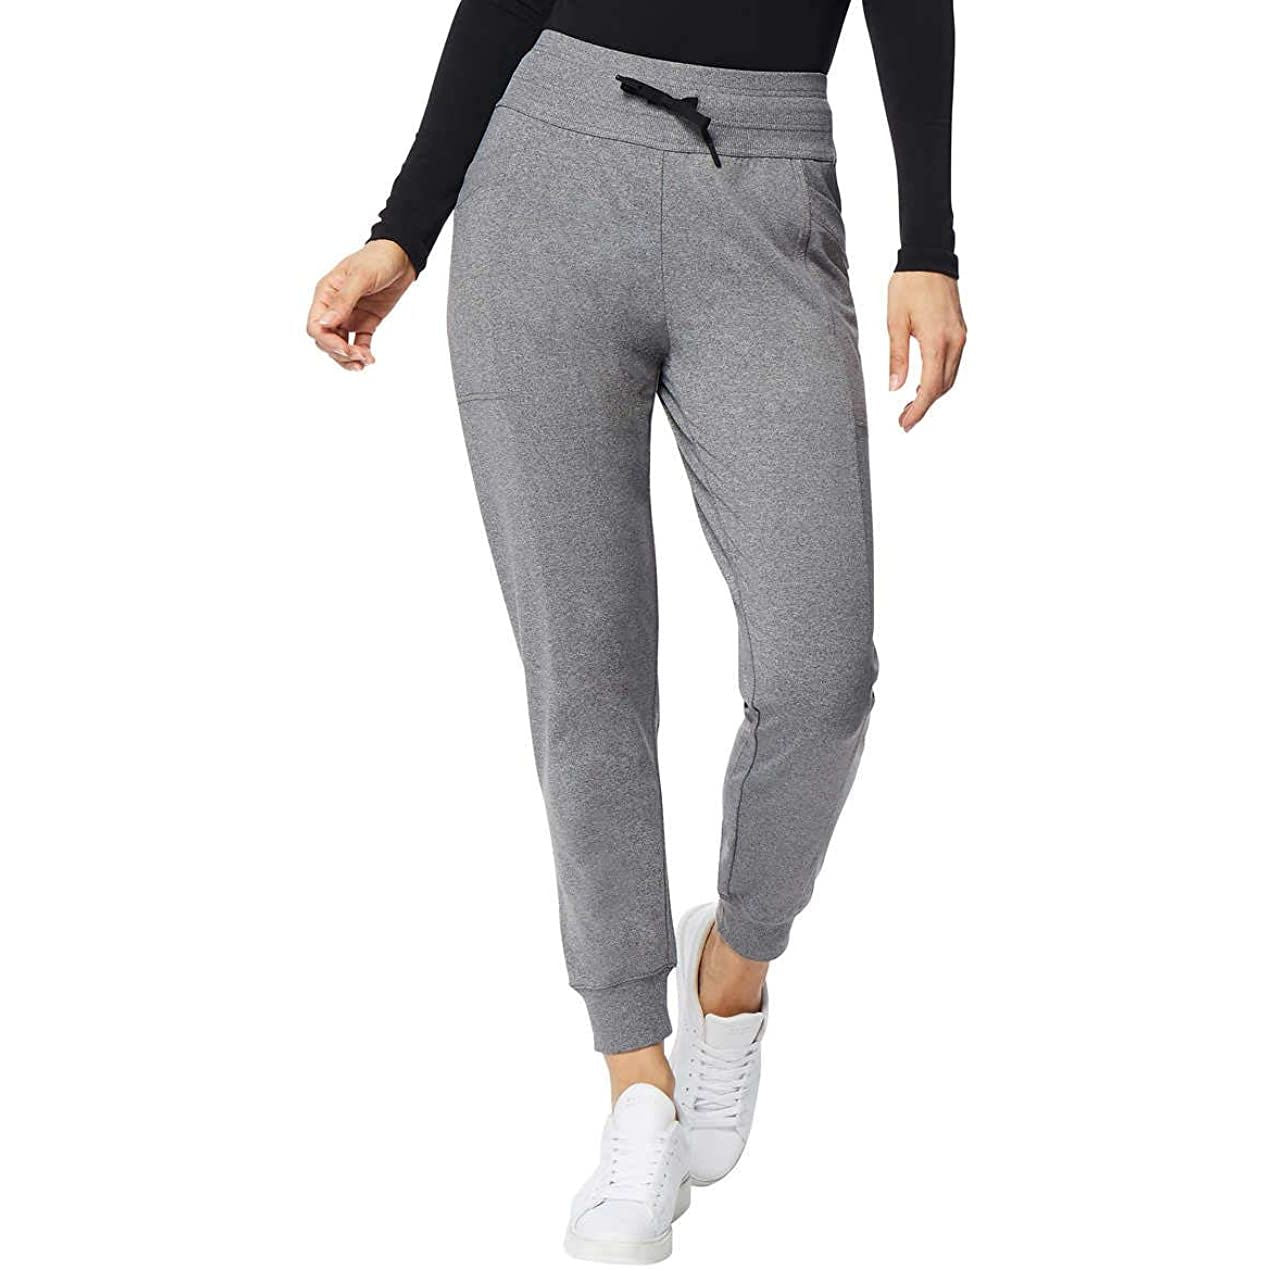 32 DEGREES Heat Women's Side Pocket Jogger Stretch Pant - mystyle.one